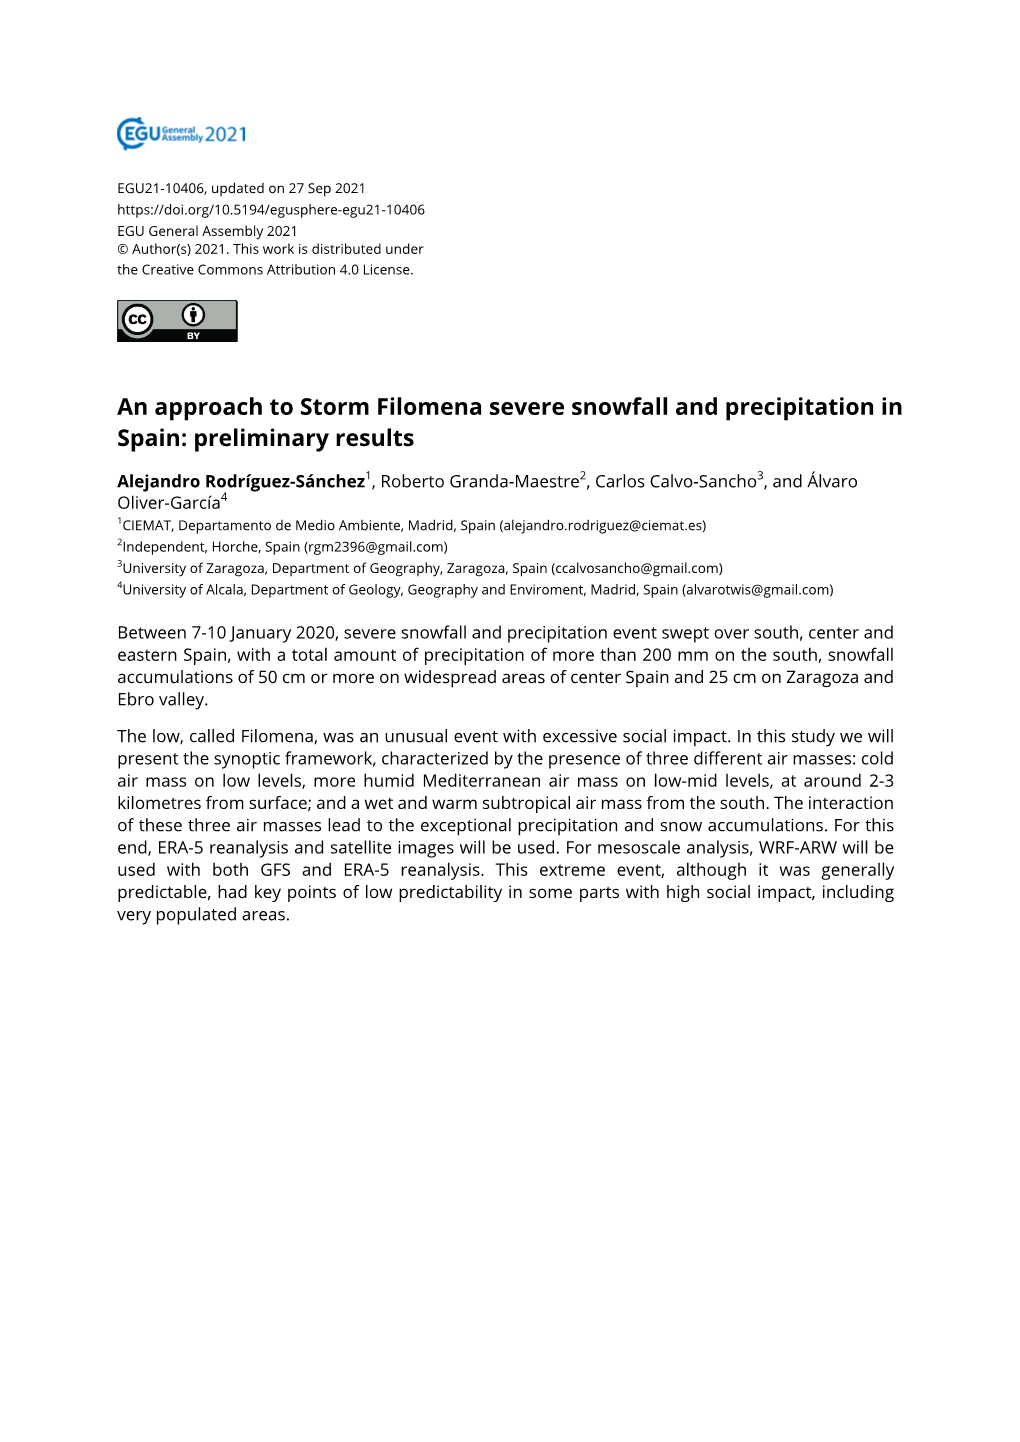 An Approach to Storm Filomena Severe Snowfall and Precipitation in Spain: Preliminary Results